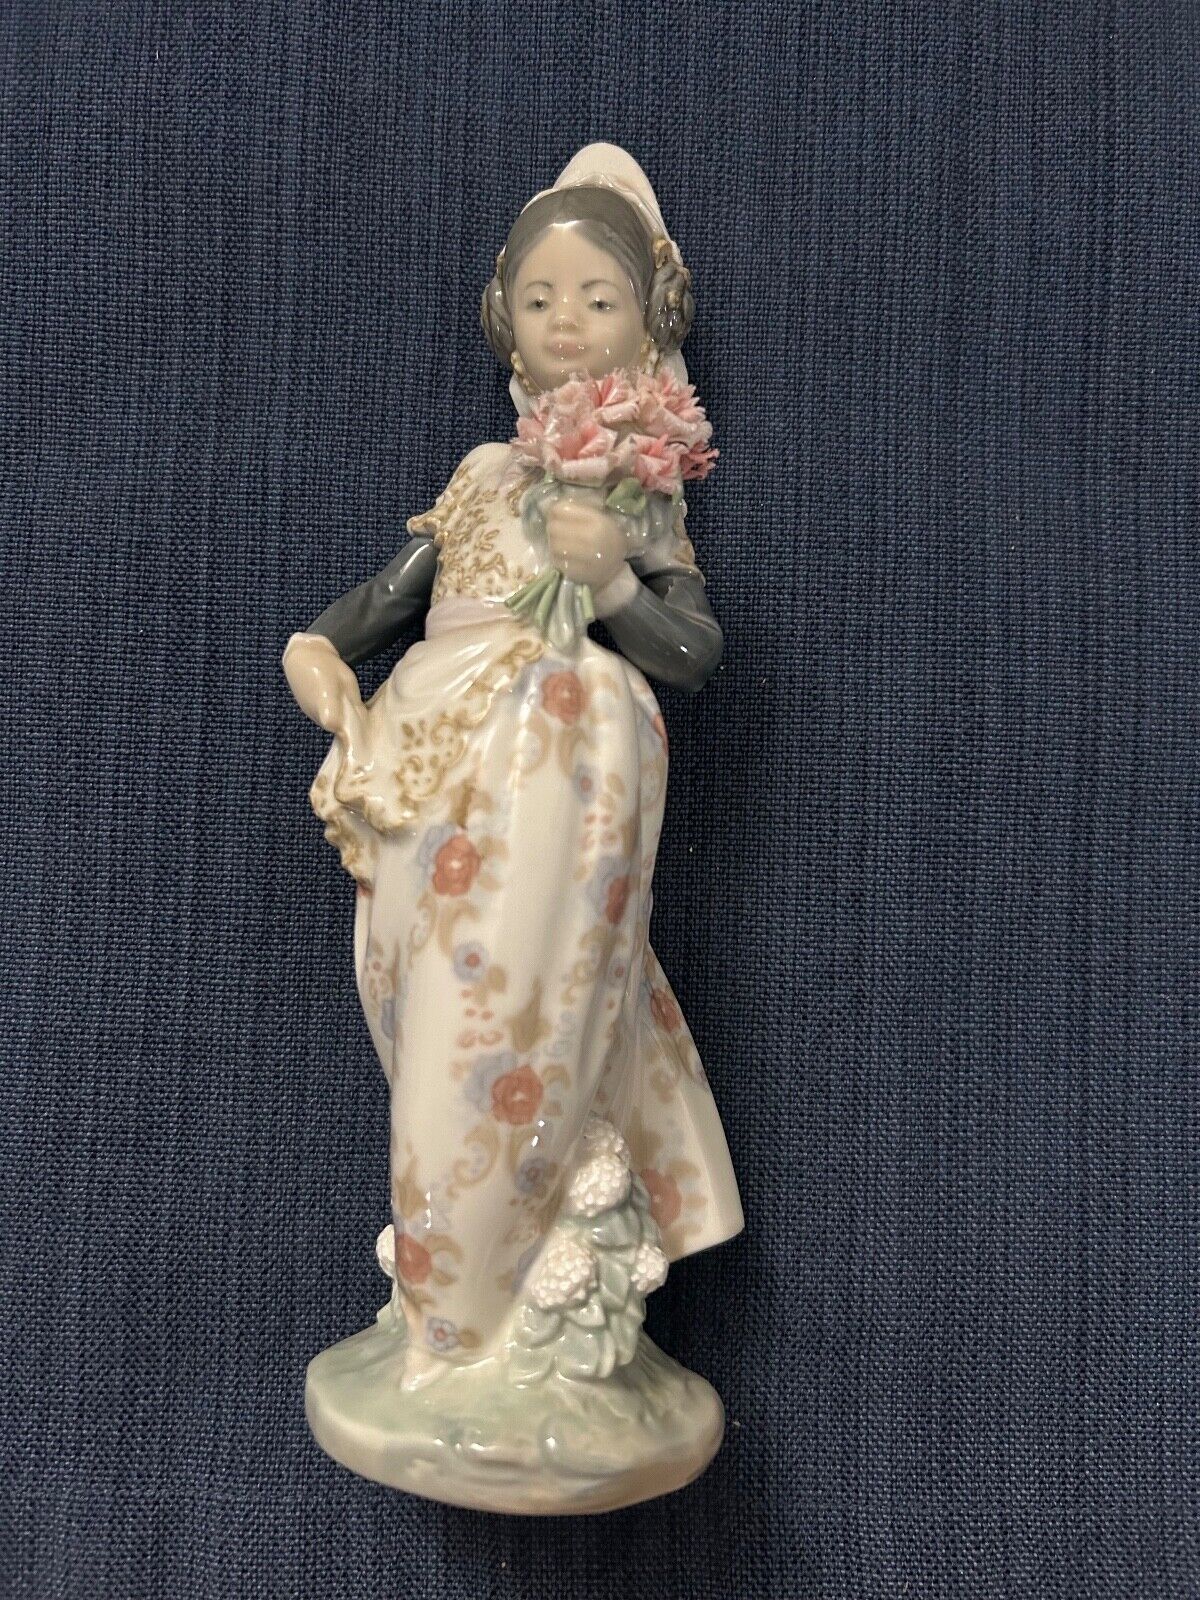 Lladro 1304 Valencian Girl With Flowers Porcelain Figurine with Lladro Box